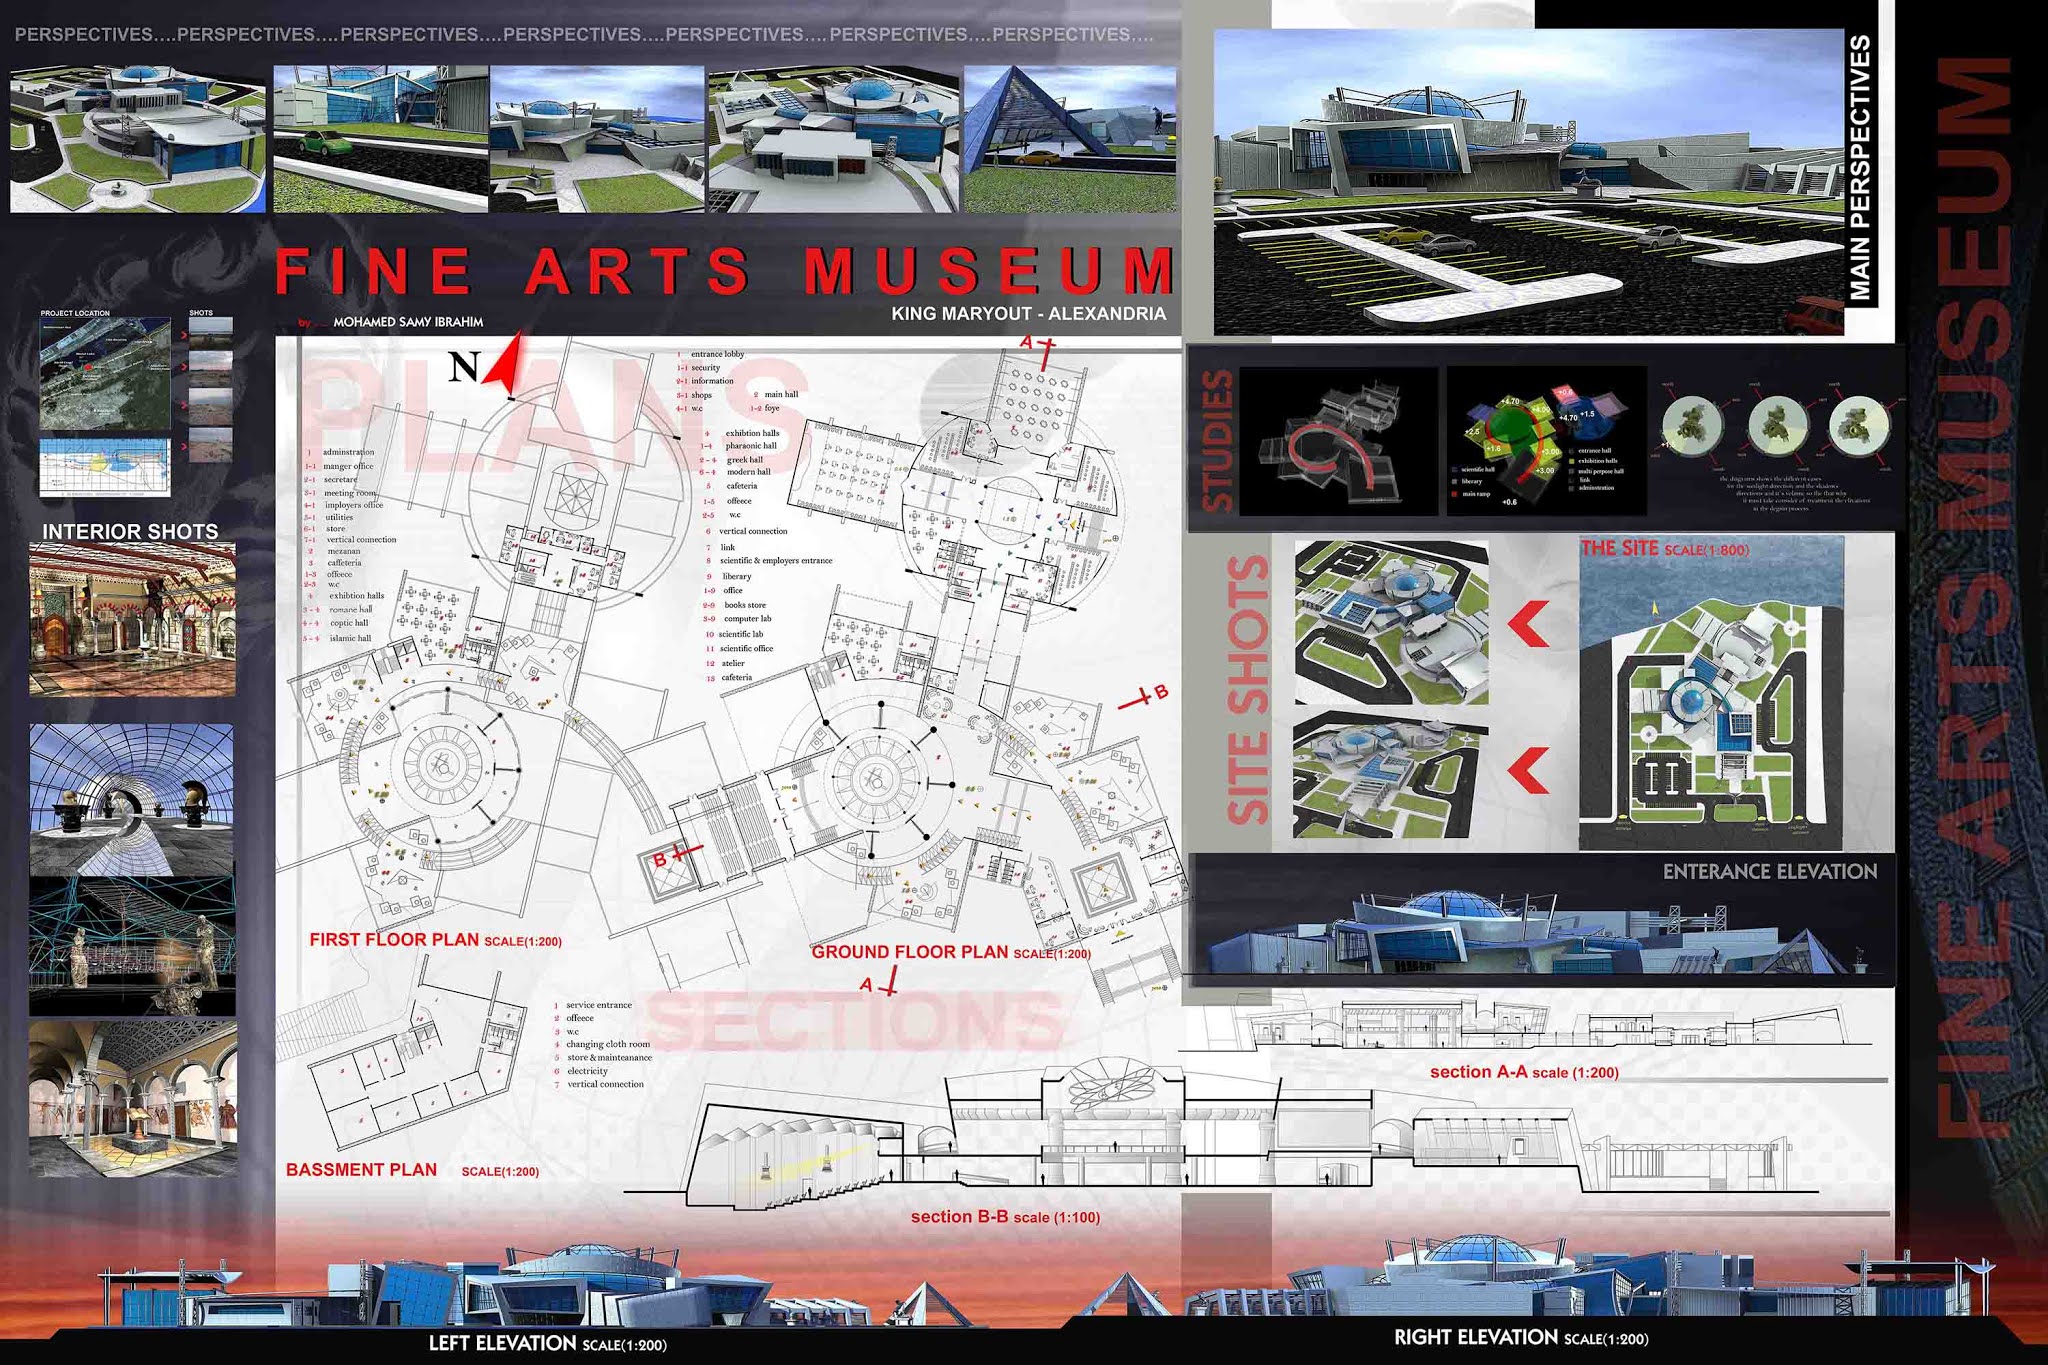 modern-art-museum,panorama-alexendrya-museum,Museum-of-nature-sustainable,submurgd-archrology-museum,plants-museum,plants-museum-project,war-memories-museum,museum-development-of-technology-industry,air-force-museum,arabic-calligraphy-museum,fine-arts-museum,war-&-piece-panorama-of-arab-isreal-eternity-struggle-in-ismaalia,panorama-of-war-and-peace,sinai-military-museum,fossil-museum,fossil-museum-un-garumn-lake-fayounm,museum-of-egypt,egypt-museum,egyptian-museum,natural-history-museum,History-of-Medicine-Museum,Museum-Thesis-Sheet-Composition-Ideas,War-Memorial-Museum,Terrorism-Agint-Museum,Science-&-Technology-Museum,NANO-Technology-Museum,Museum-&-Research